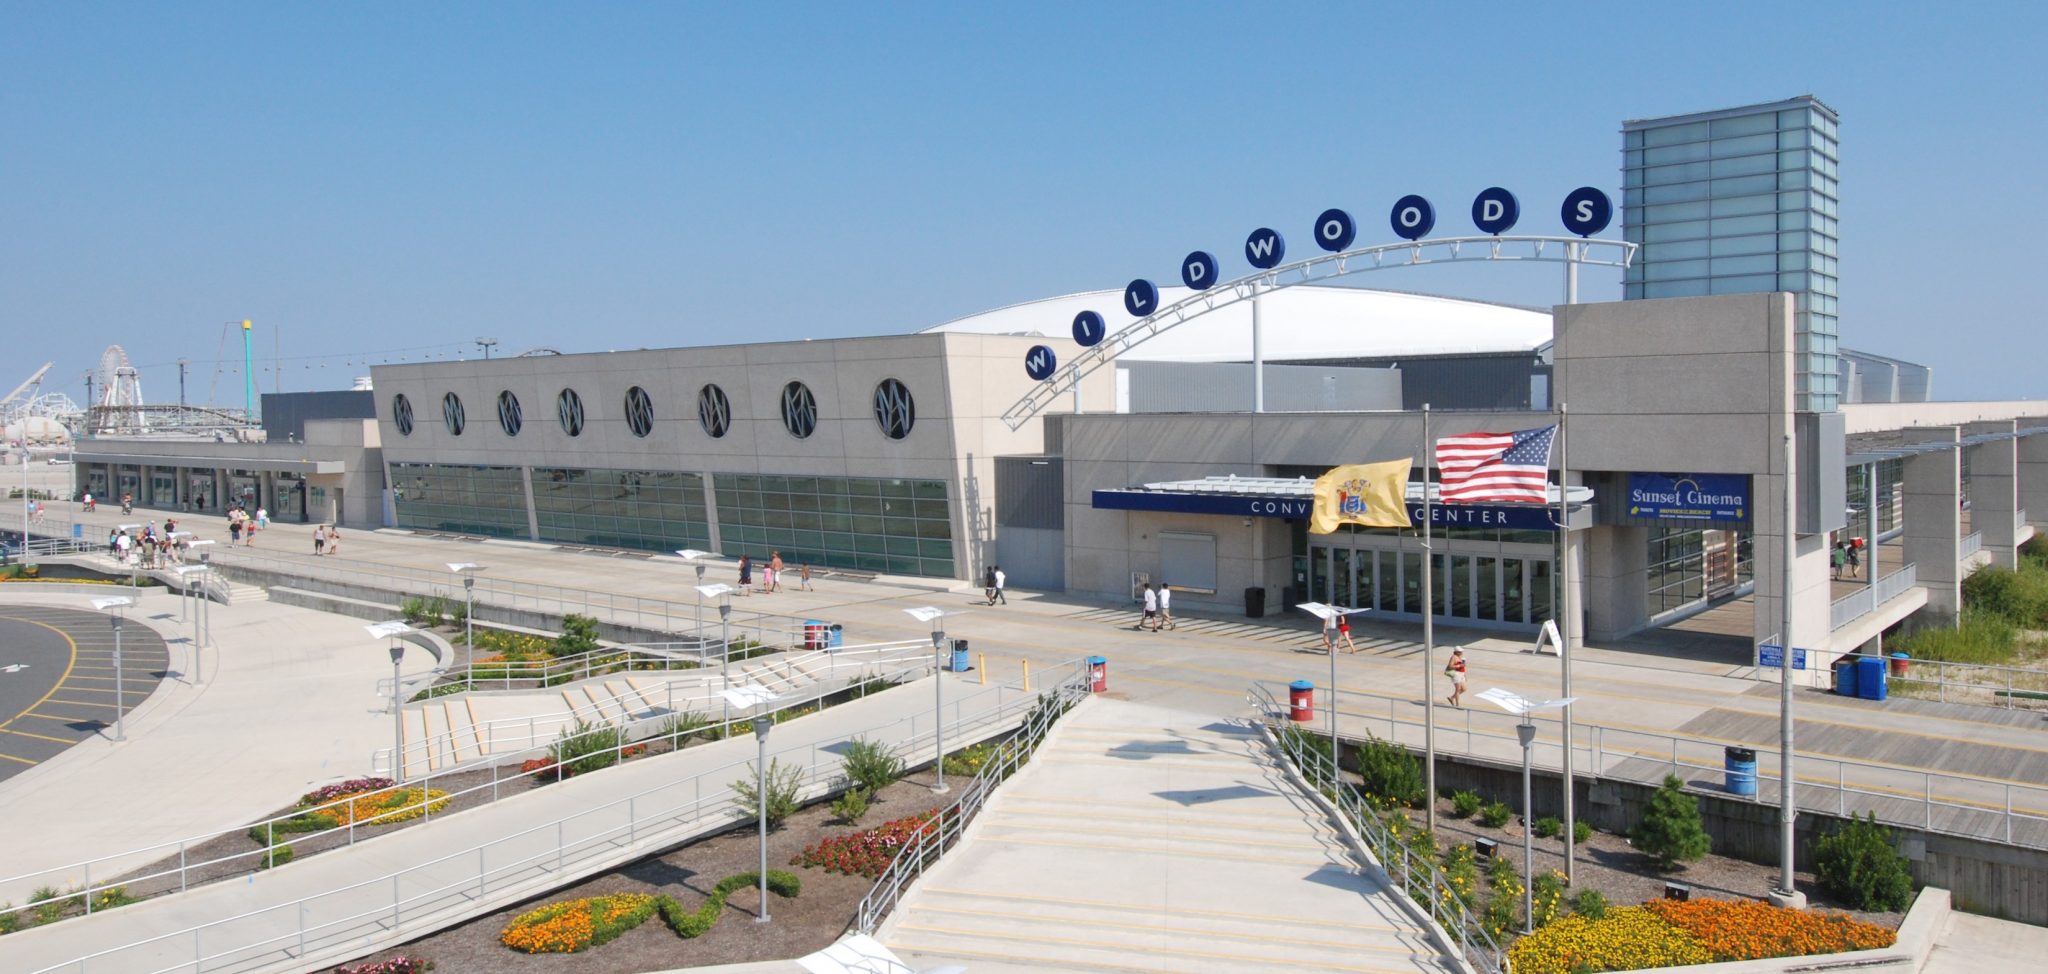 The Wildwoods Convention Center Awarded the 2021 Prime Site Award by